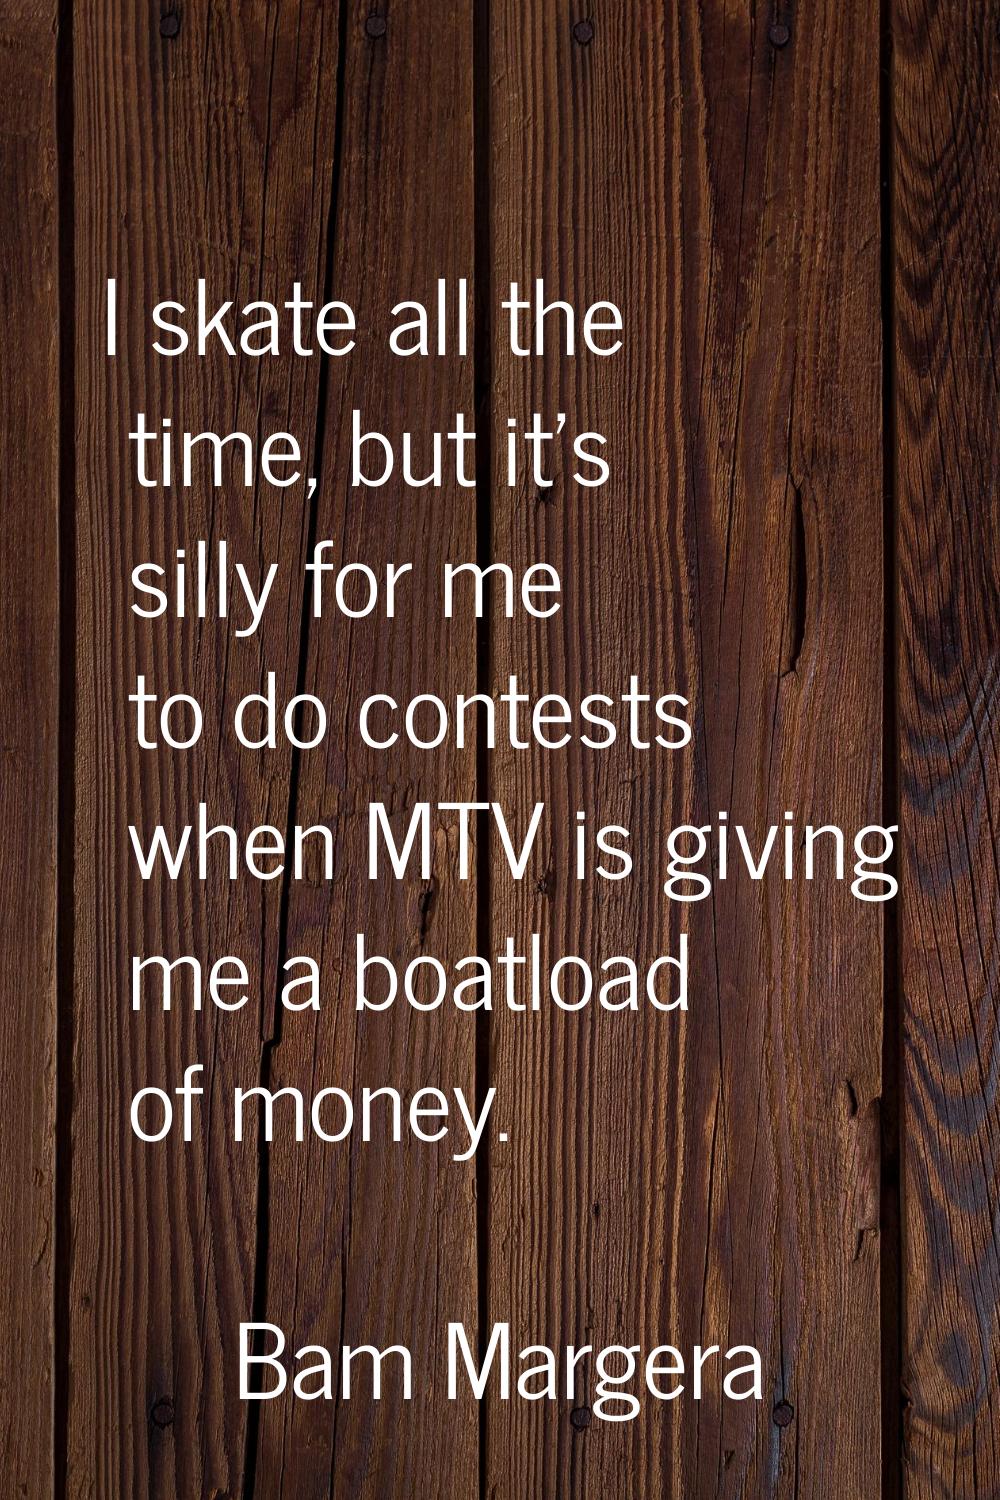 I skate all the time, but it's silly for me to do contests when MTV is giving me a boatload of mone